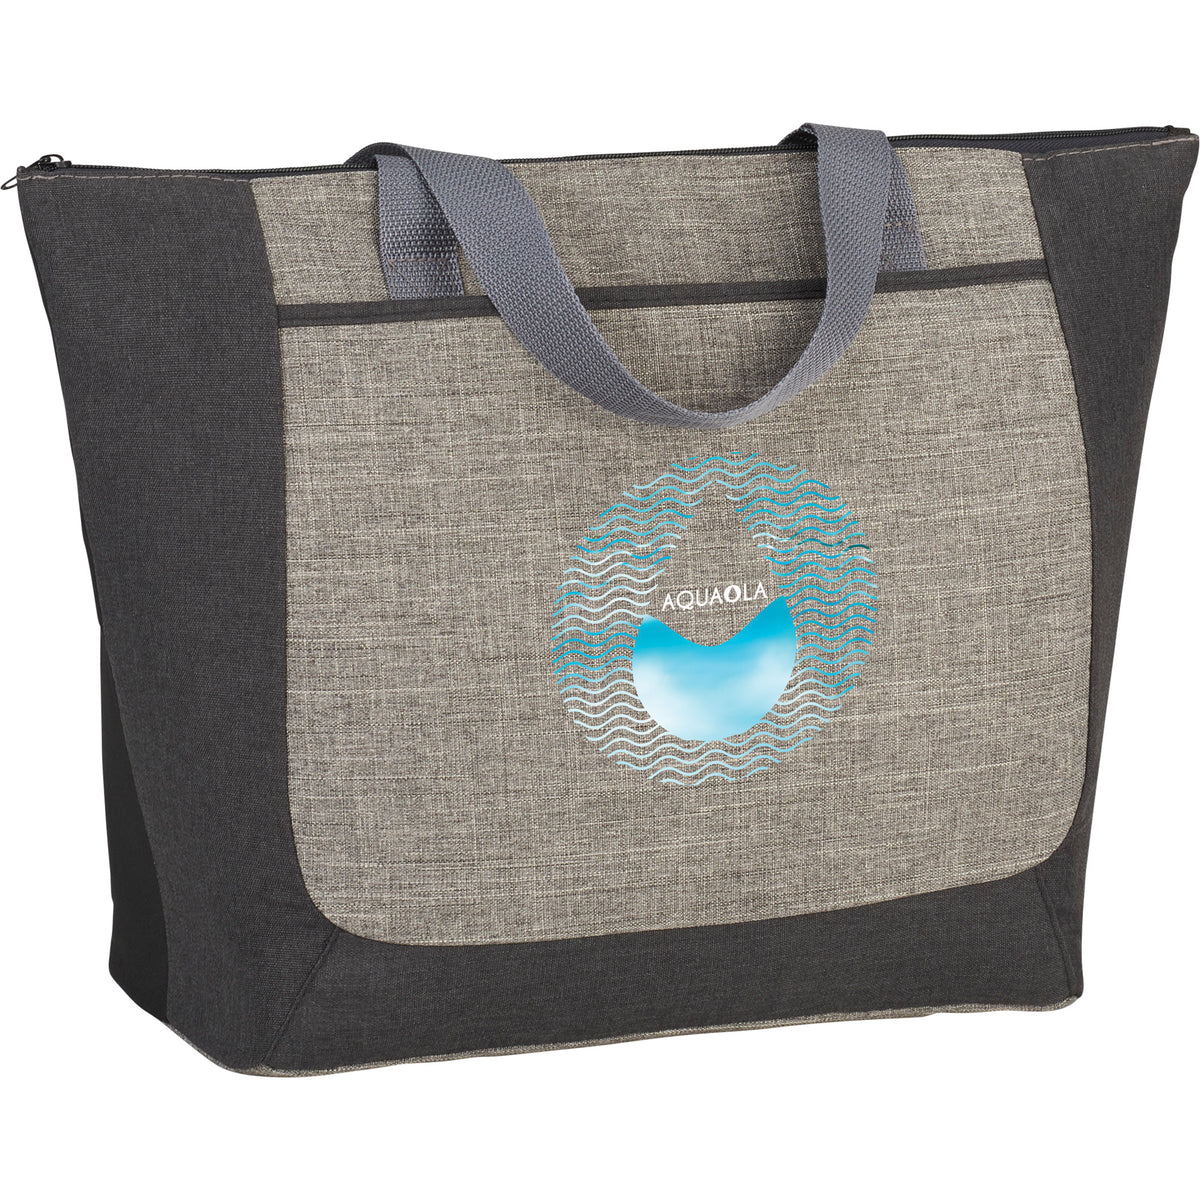 Reclaim Two-Tone Recycled Zippered Tote